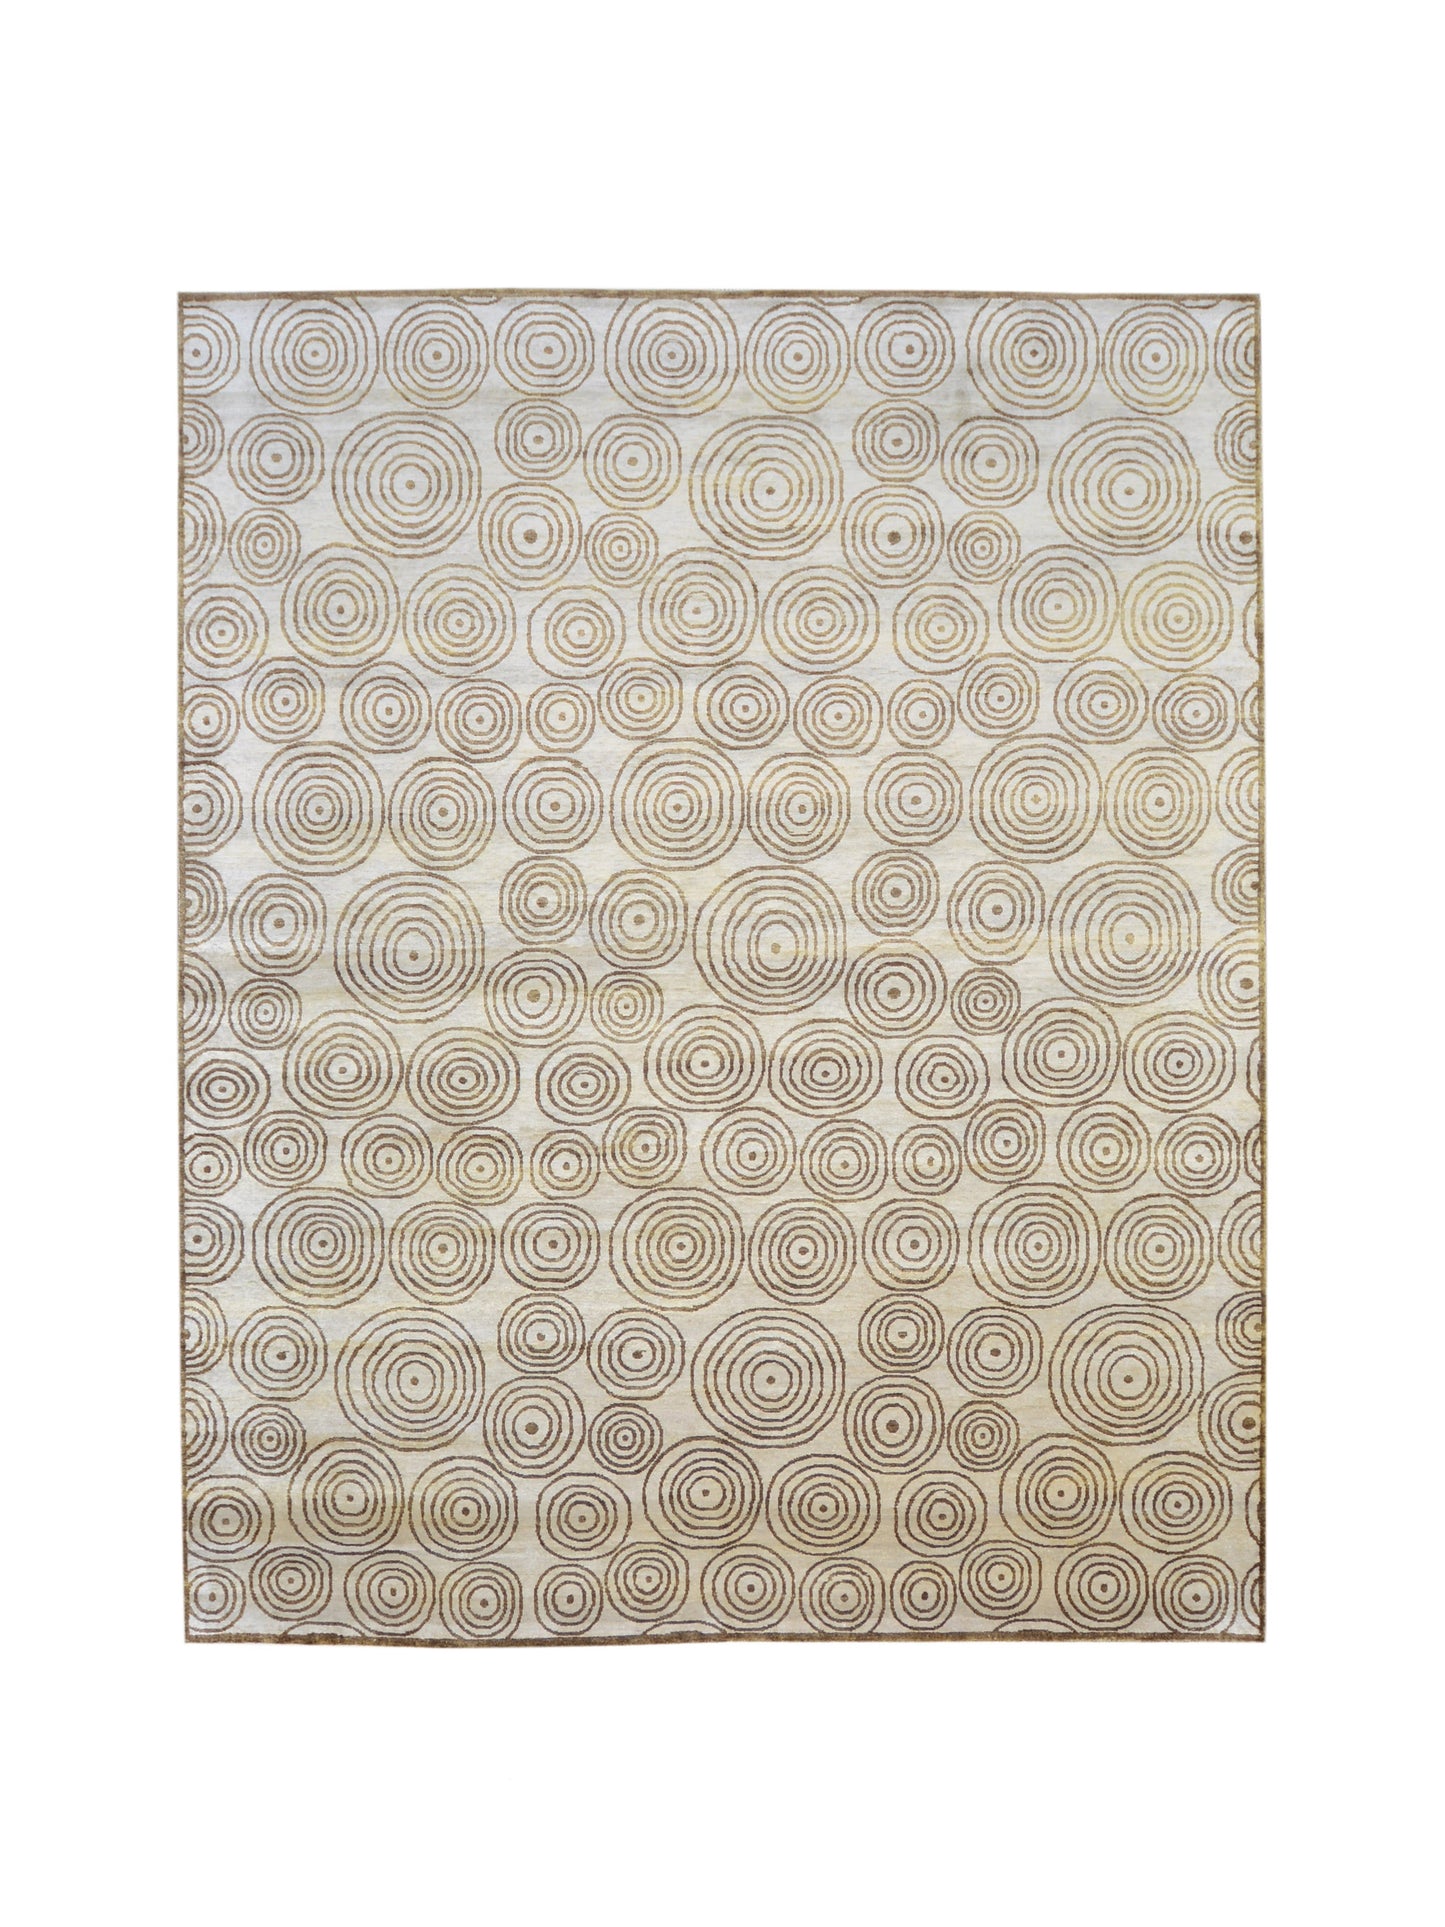 Get trendy with Ivory, Brown Pure Silk Modern Handknotted Area Rug 7.11x9.10ft 242x299Cms - Modern Rugs available at Jaipur Oriental Rugs. Grab yours for $5610.00 today!